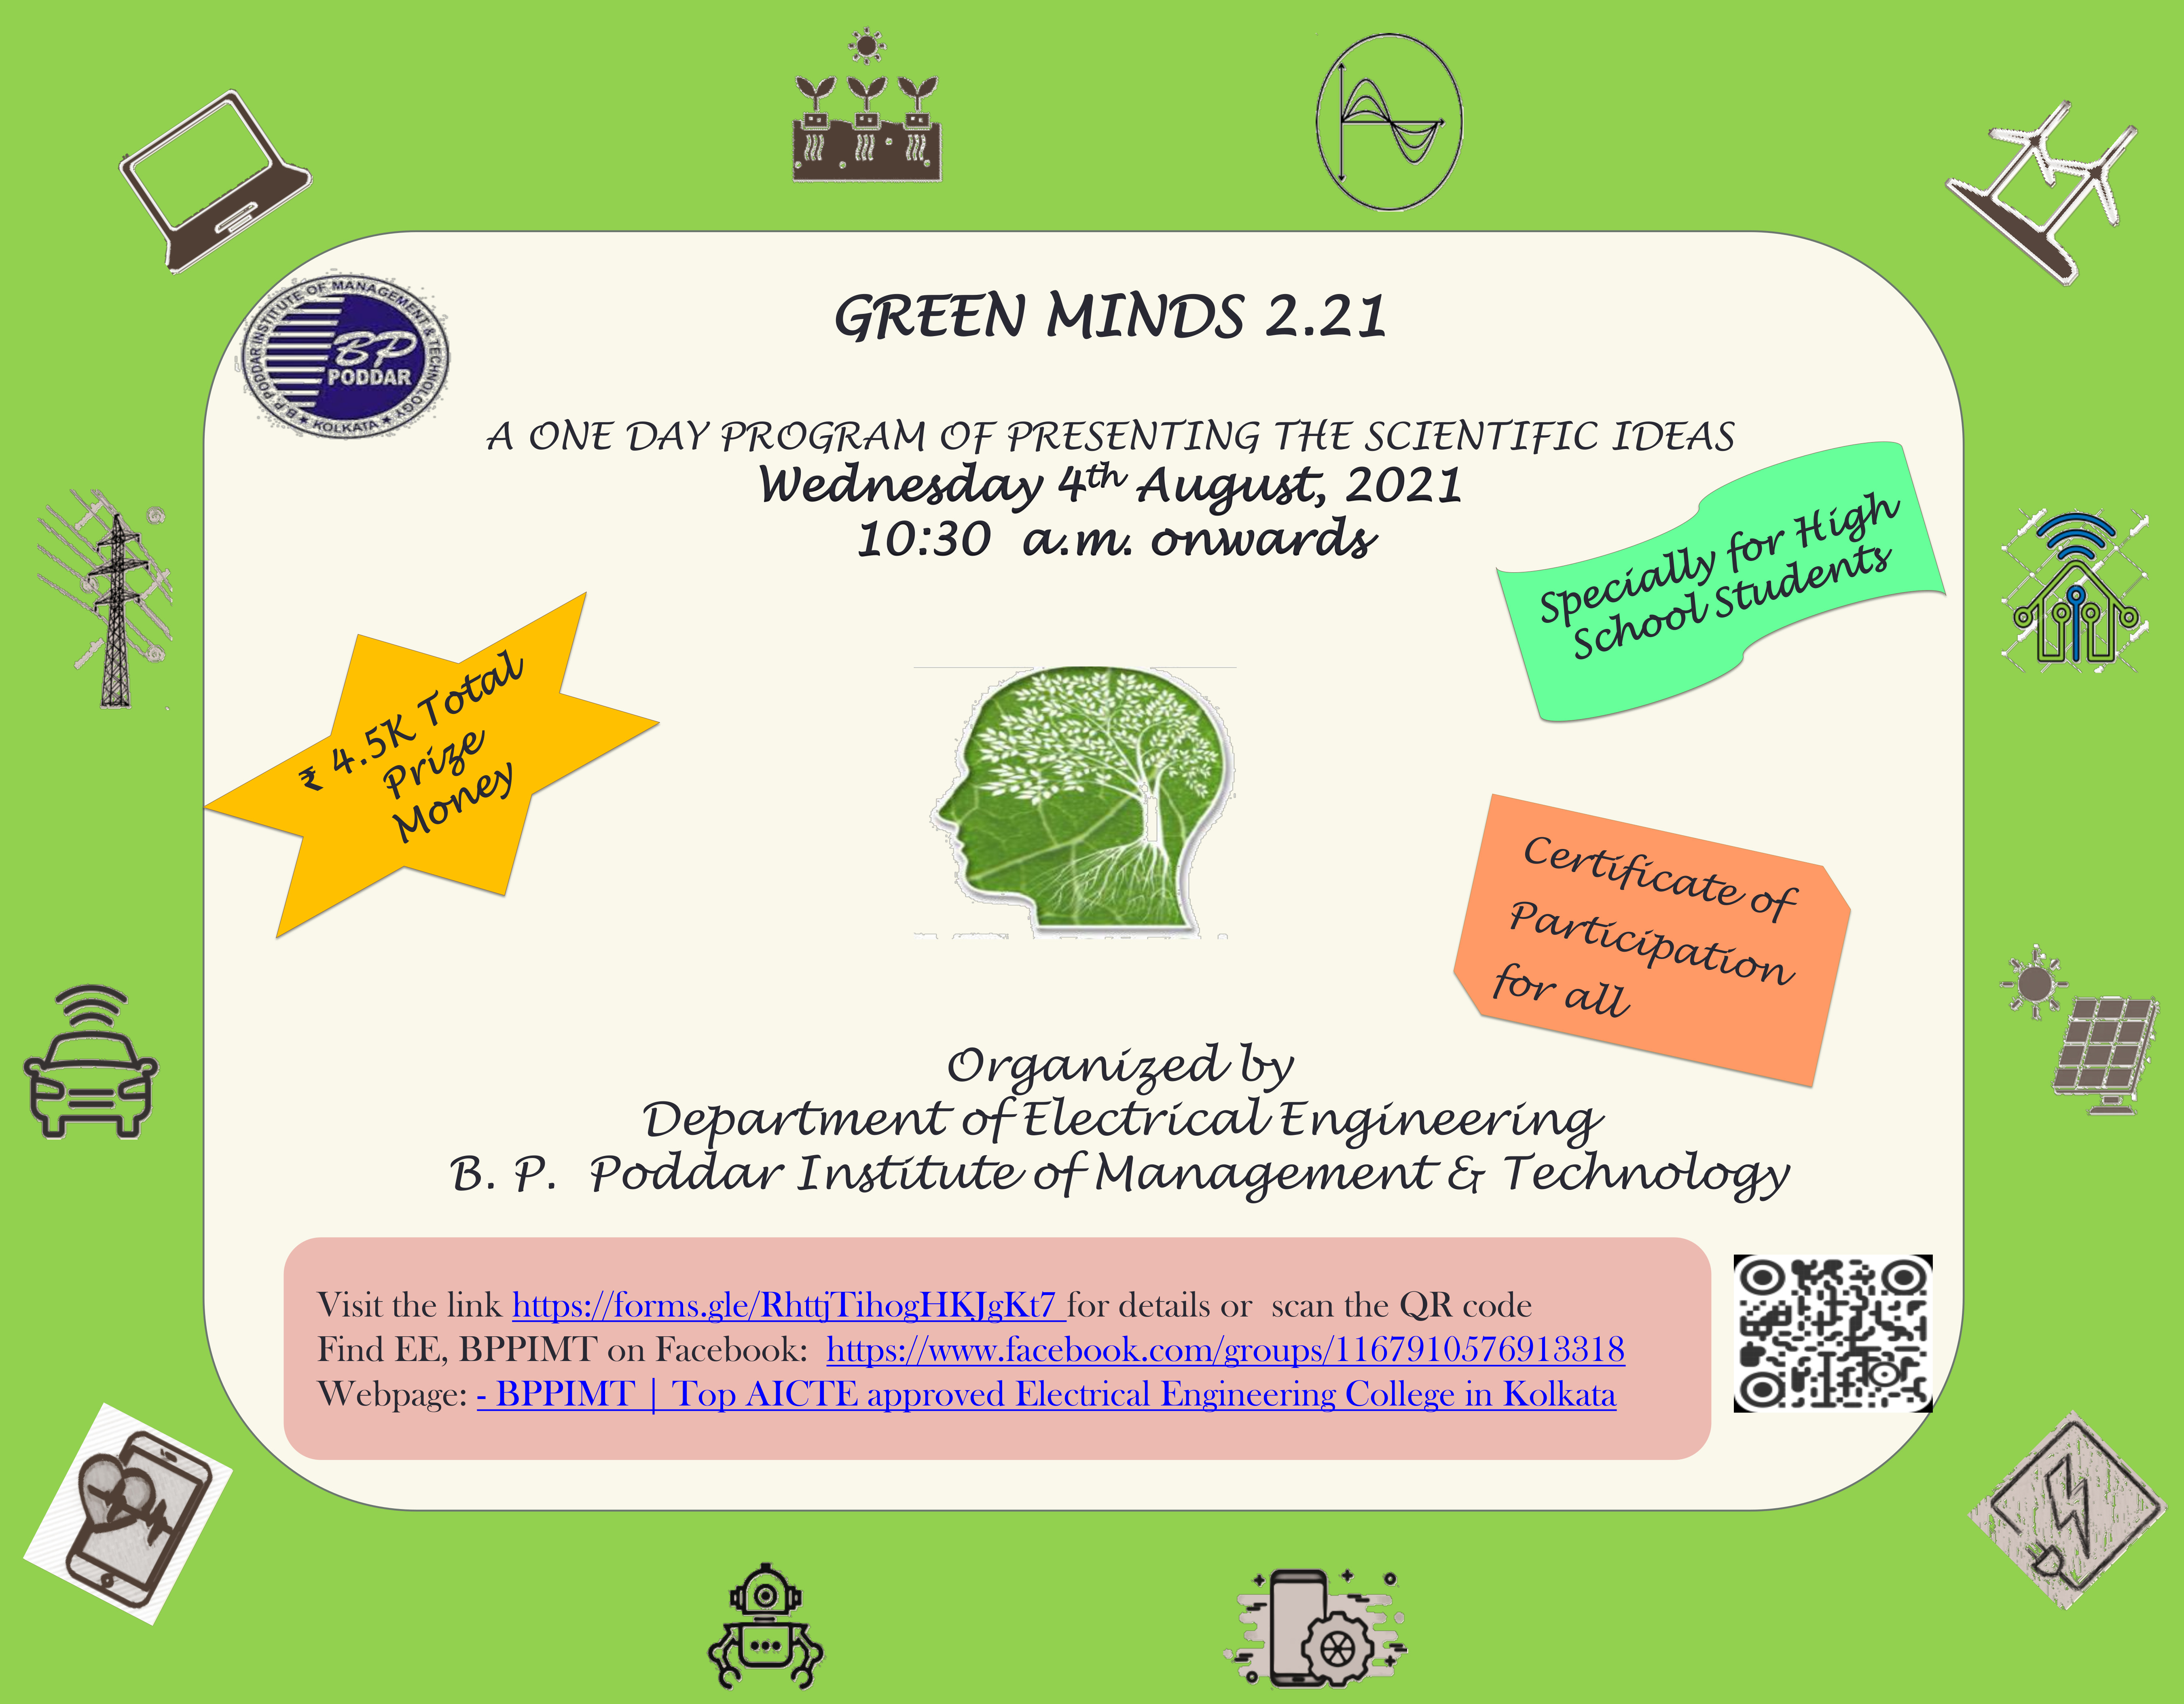 GREENMINDS 2.21